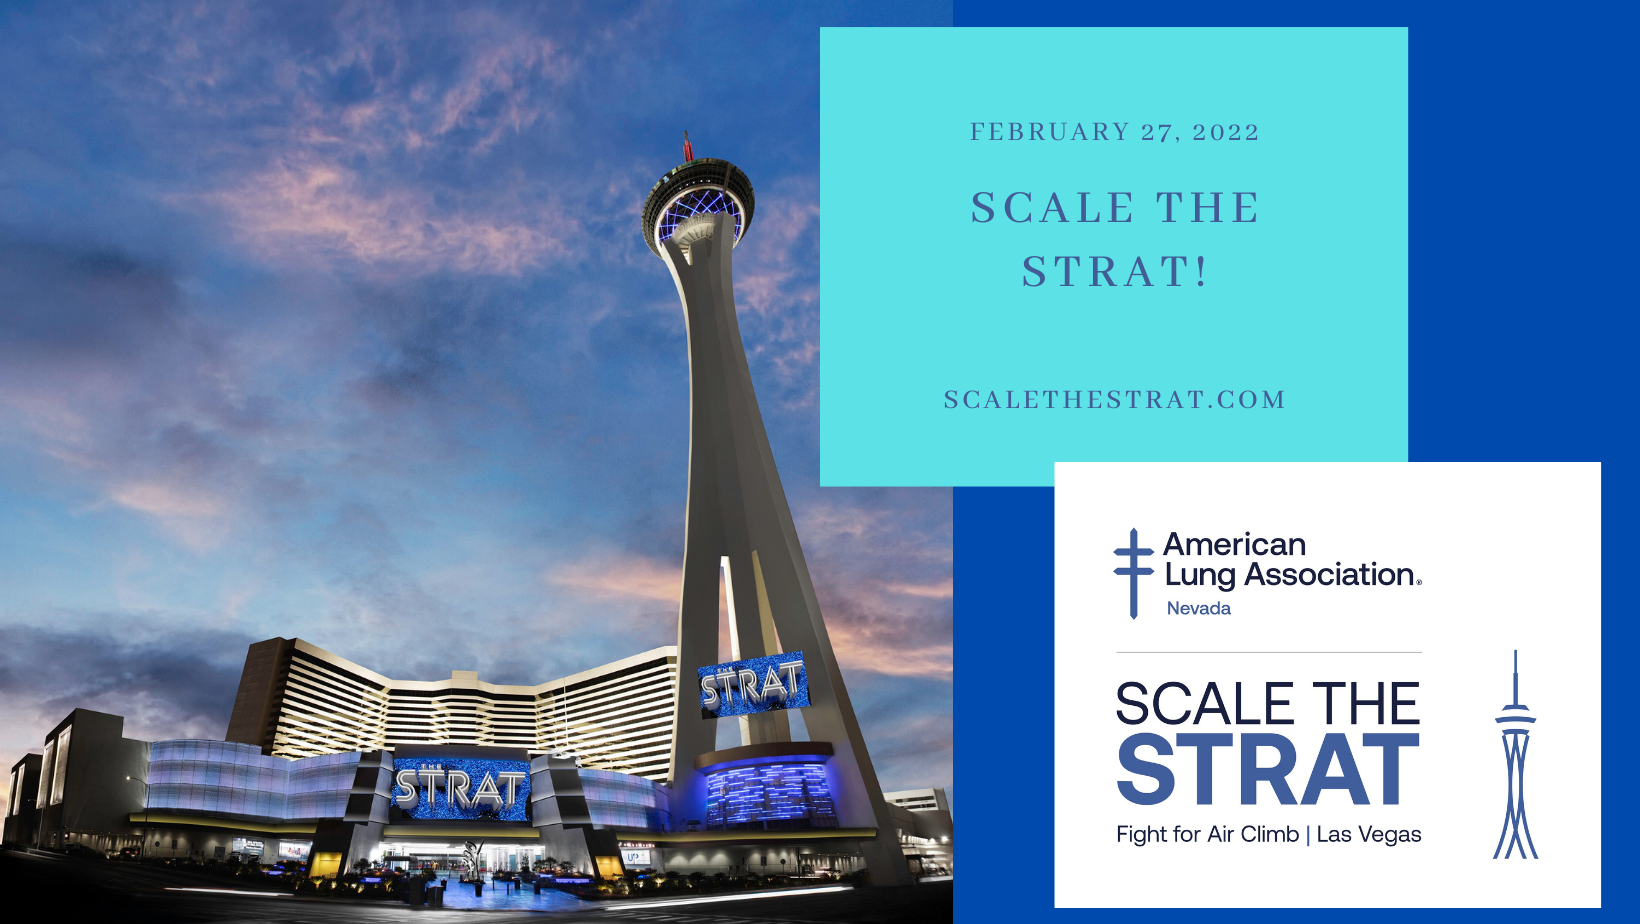 American Lung Association in Nevada’s Scale The STRAT returns February